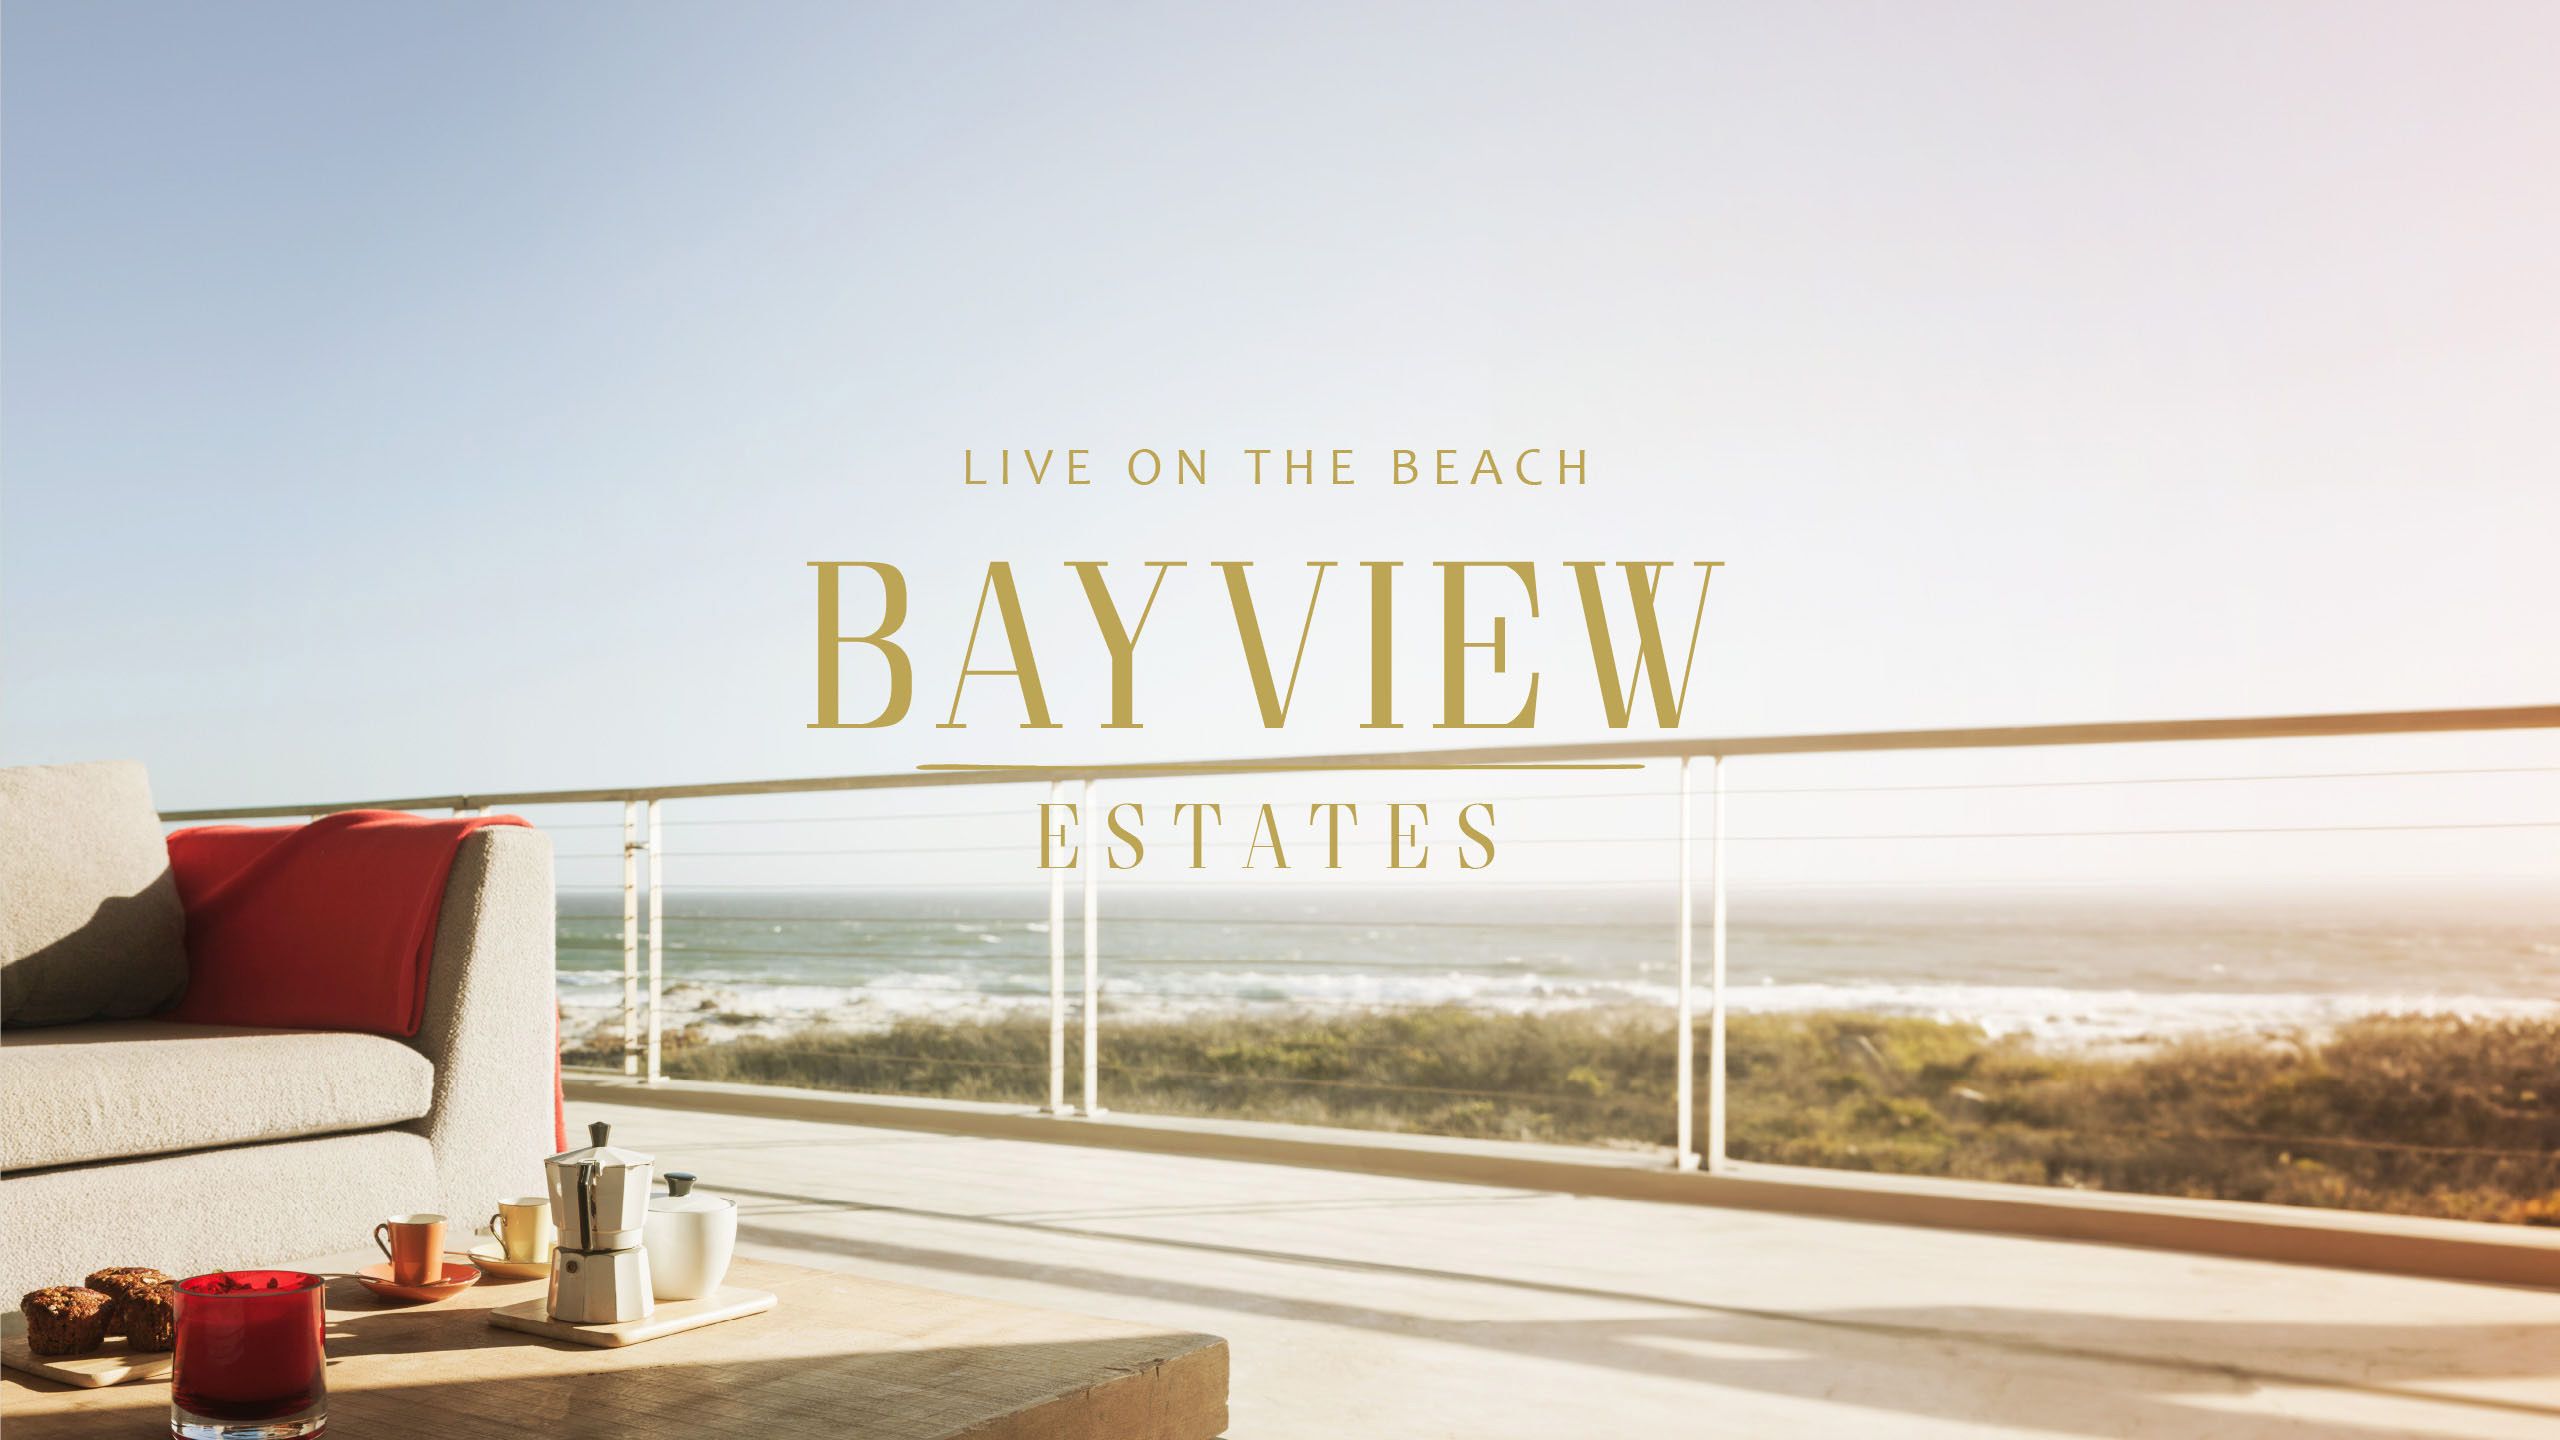 Bayview Estates billboard graphic Live on the Beach Bayview Estates French Creek